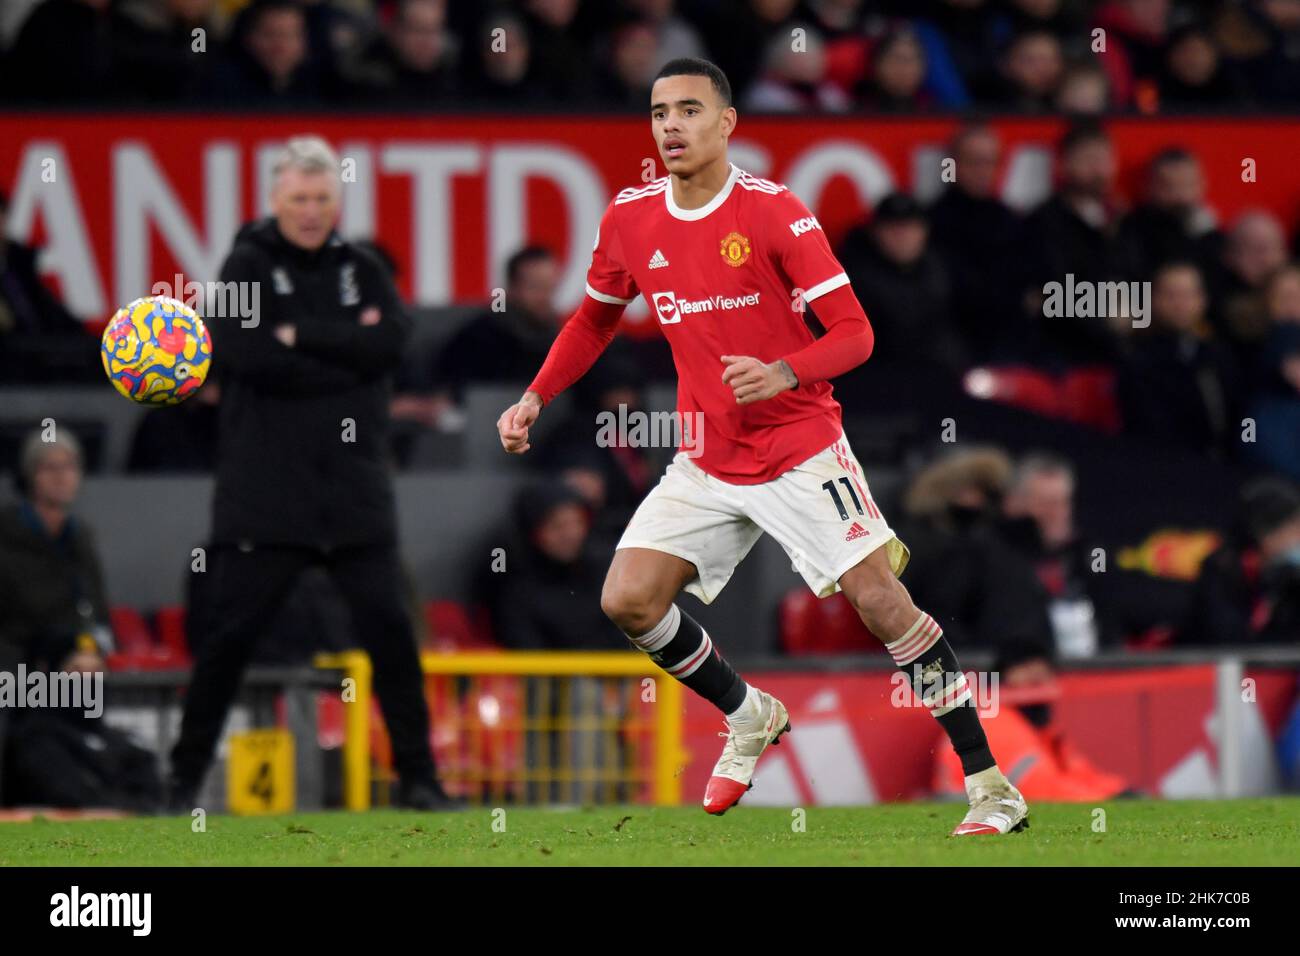 Manchester United's Mason Greenwood during the Premier League match at Old Trafford, Manchester, UK. Picture date: Saturday January 22, 2022. Photo credit should read: Anthony Devlin Stock Photo